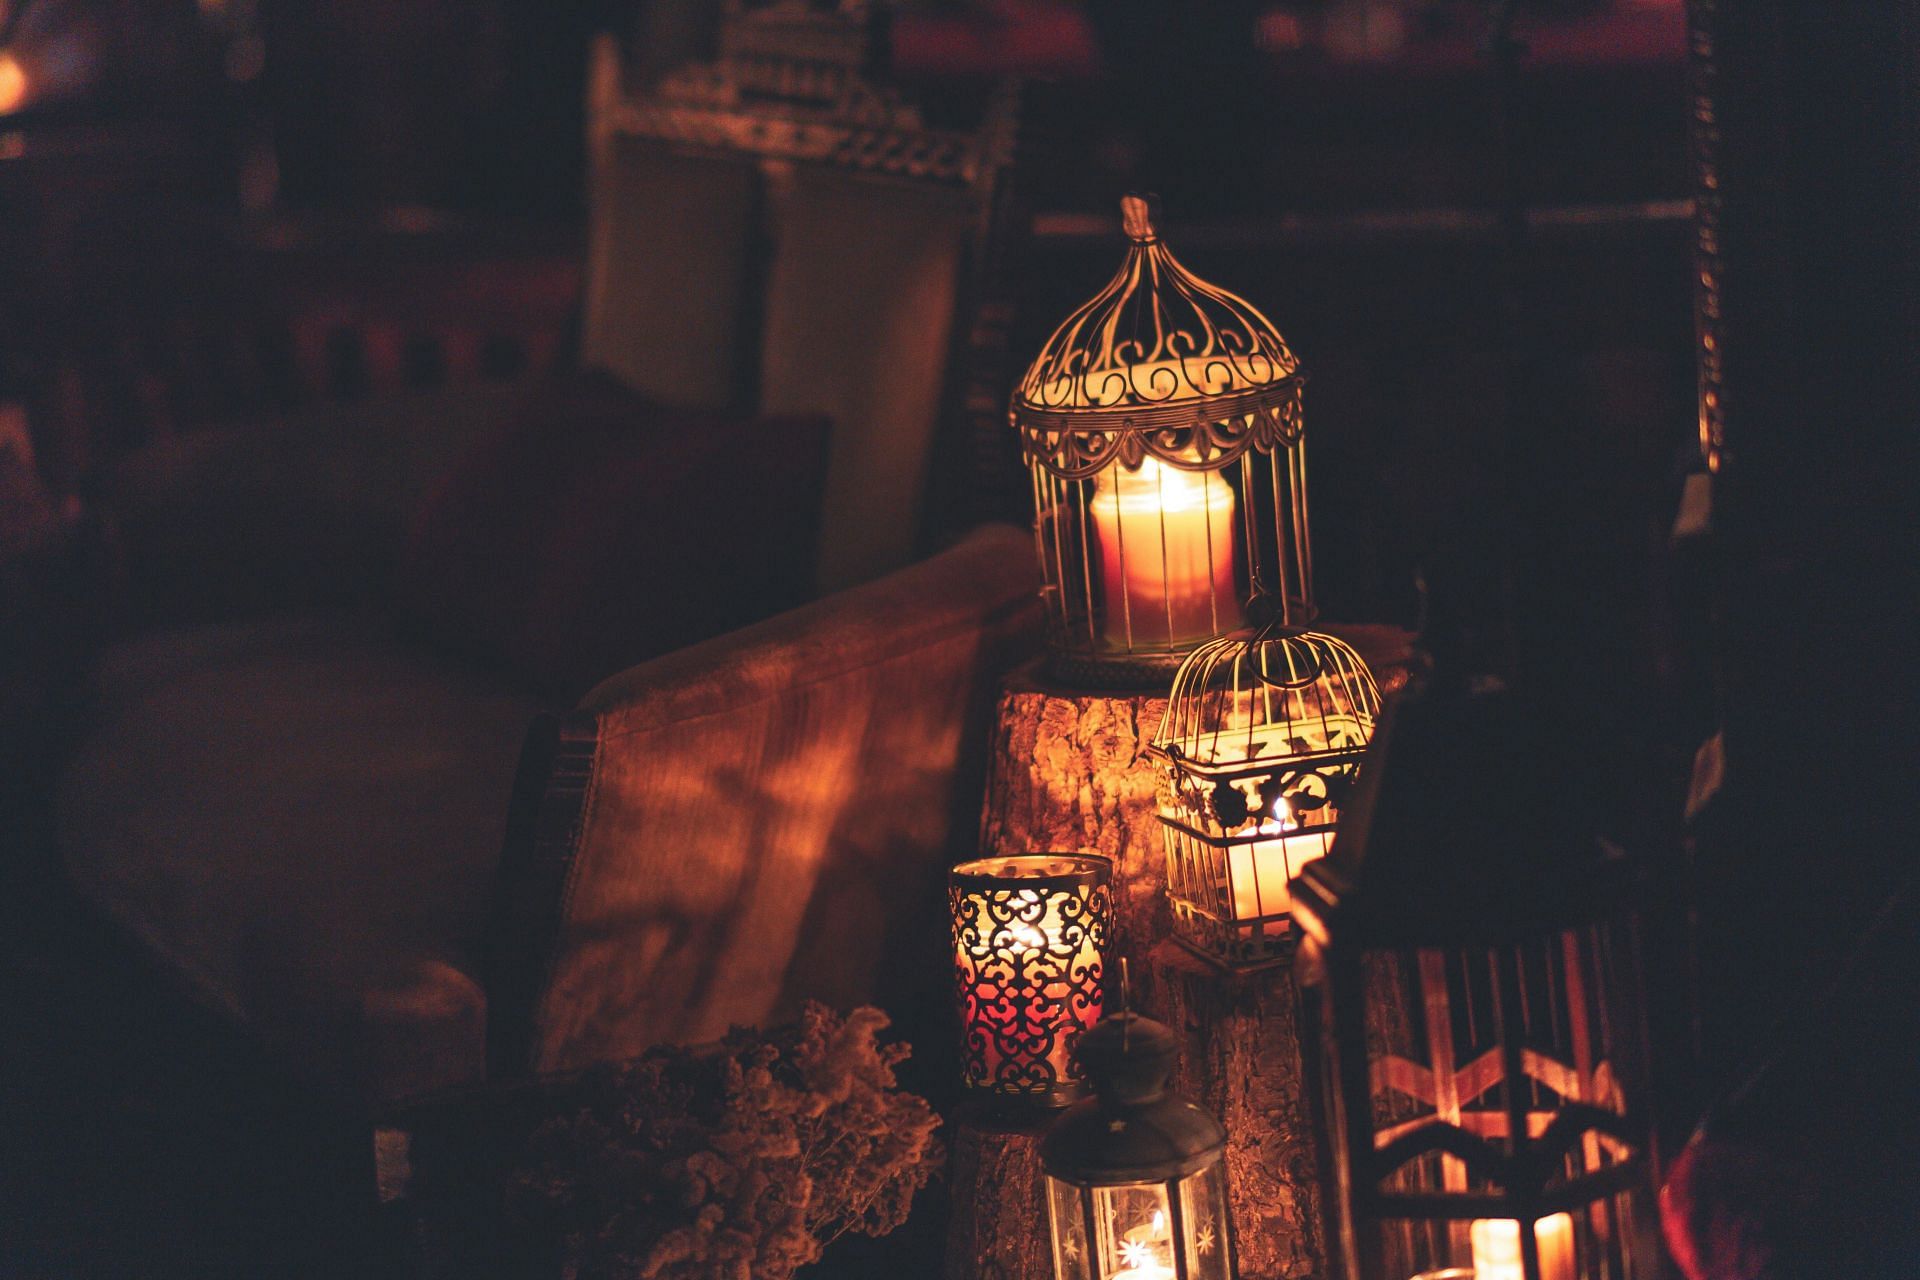 Benefits of fasting in ramadan (image sourced via Pexels / Photo by craig)